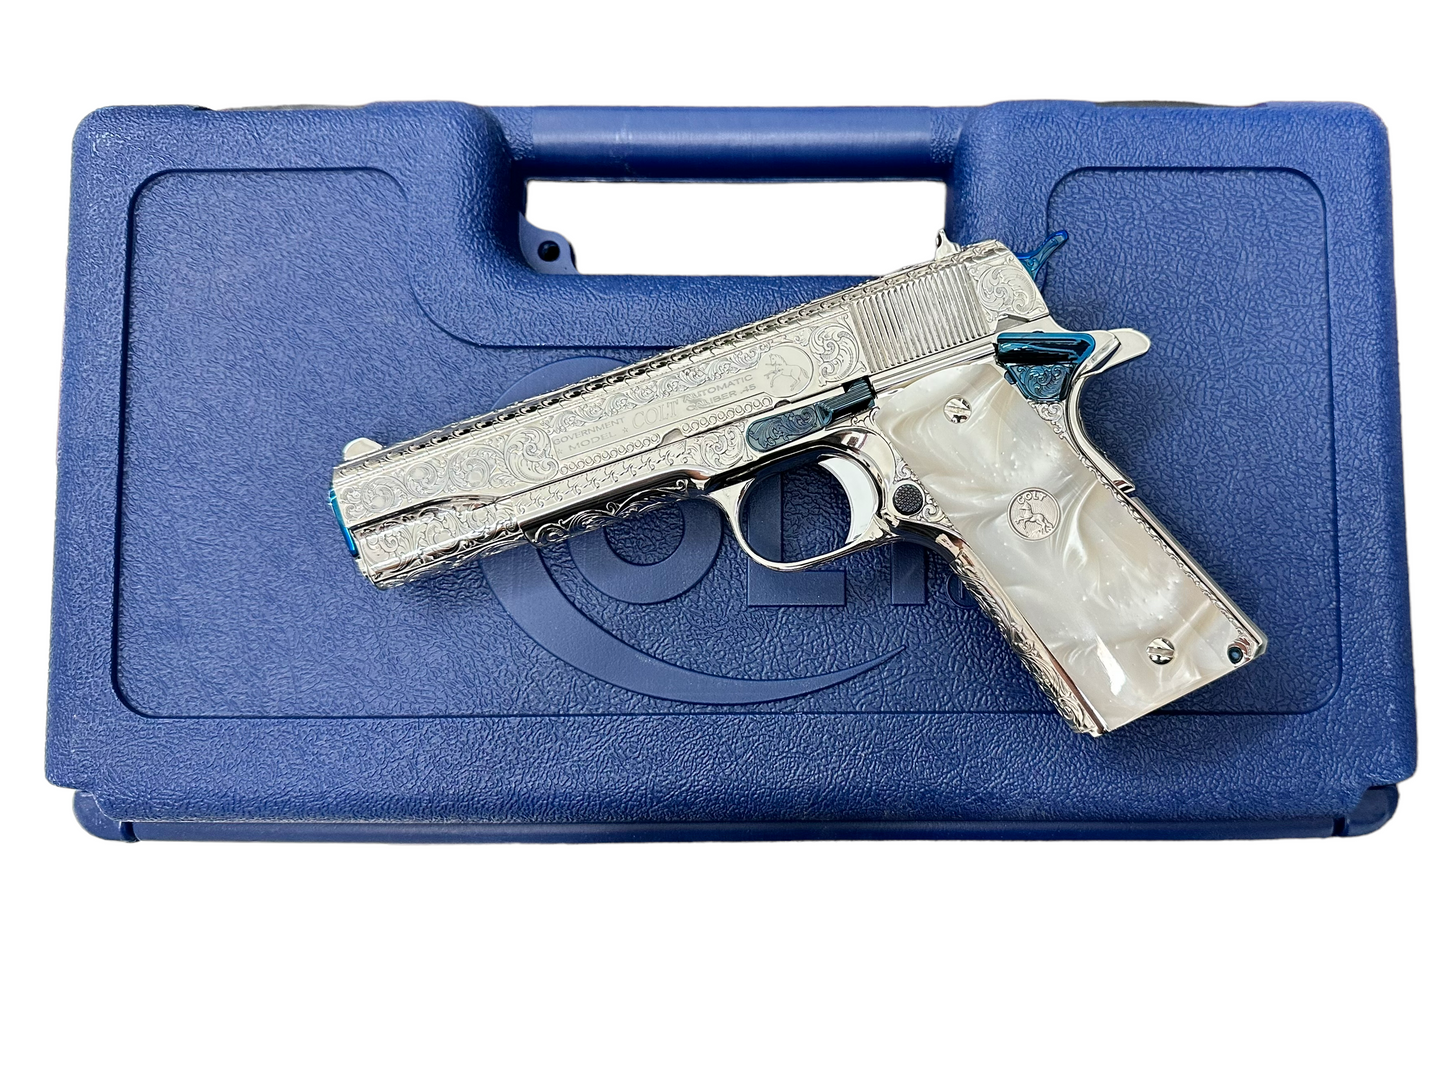 COLT CUSTOM 1911 HIGH POLISHED AND NICKEL PLATED WITH NITRO BLUE ACCENTS FULLY ENGRAVED .45acp